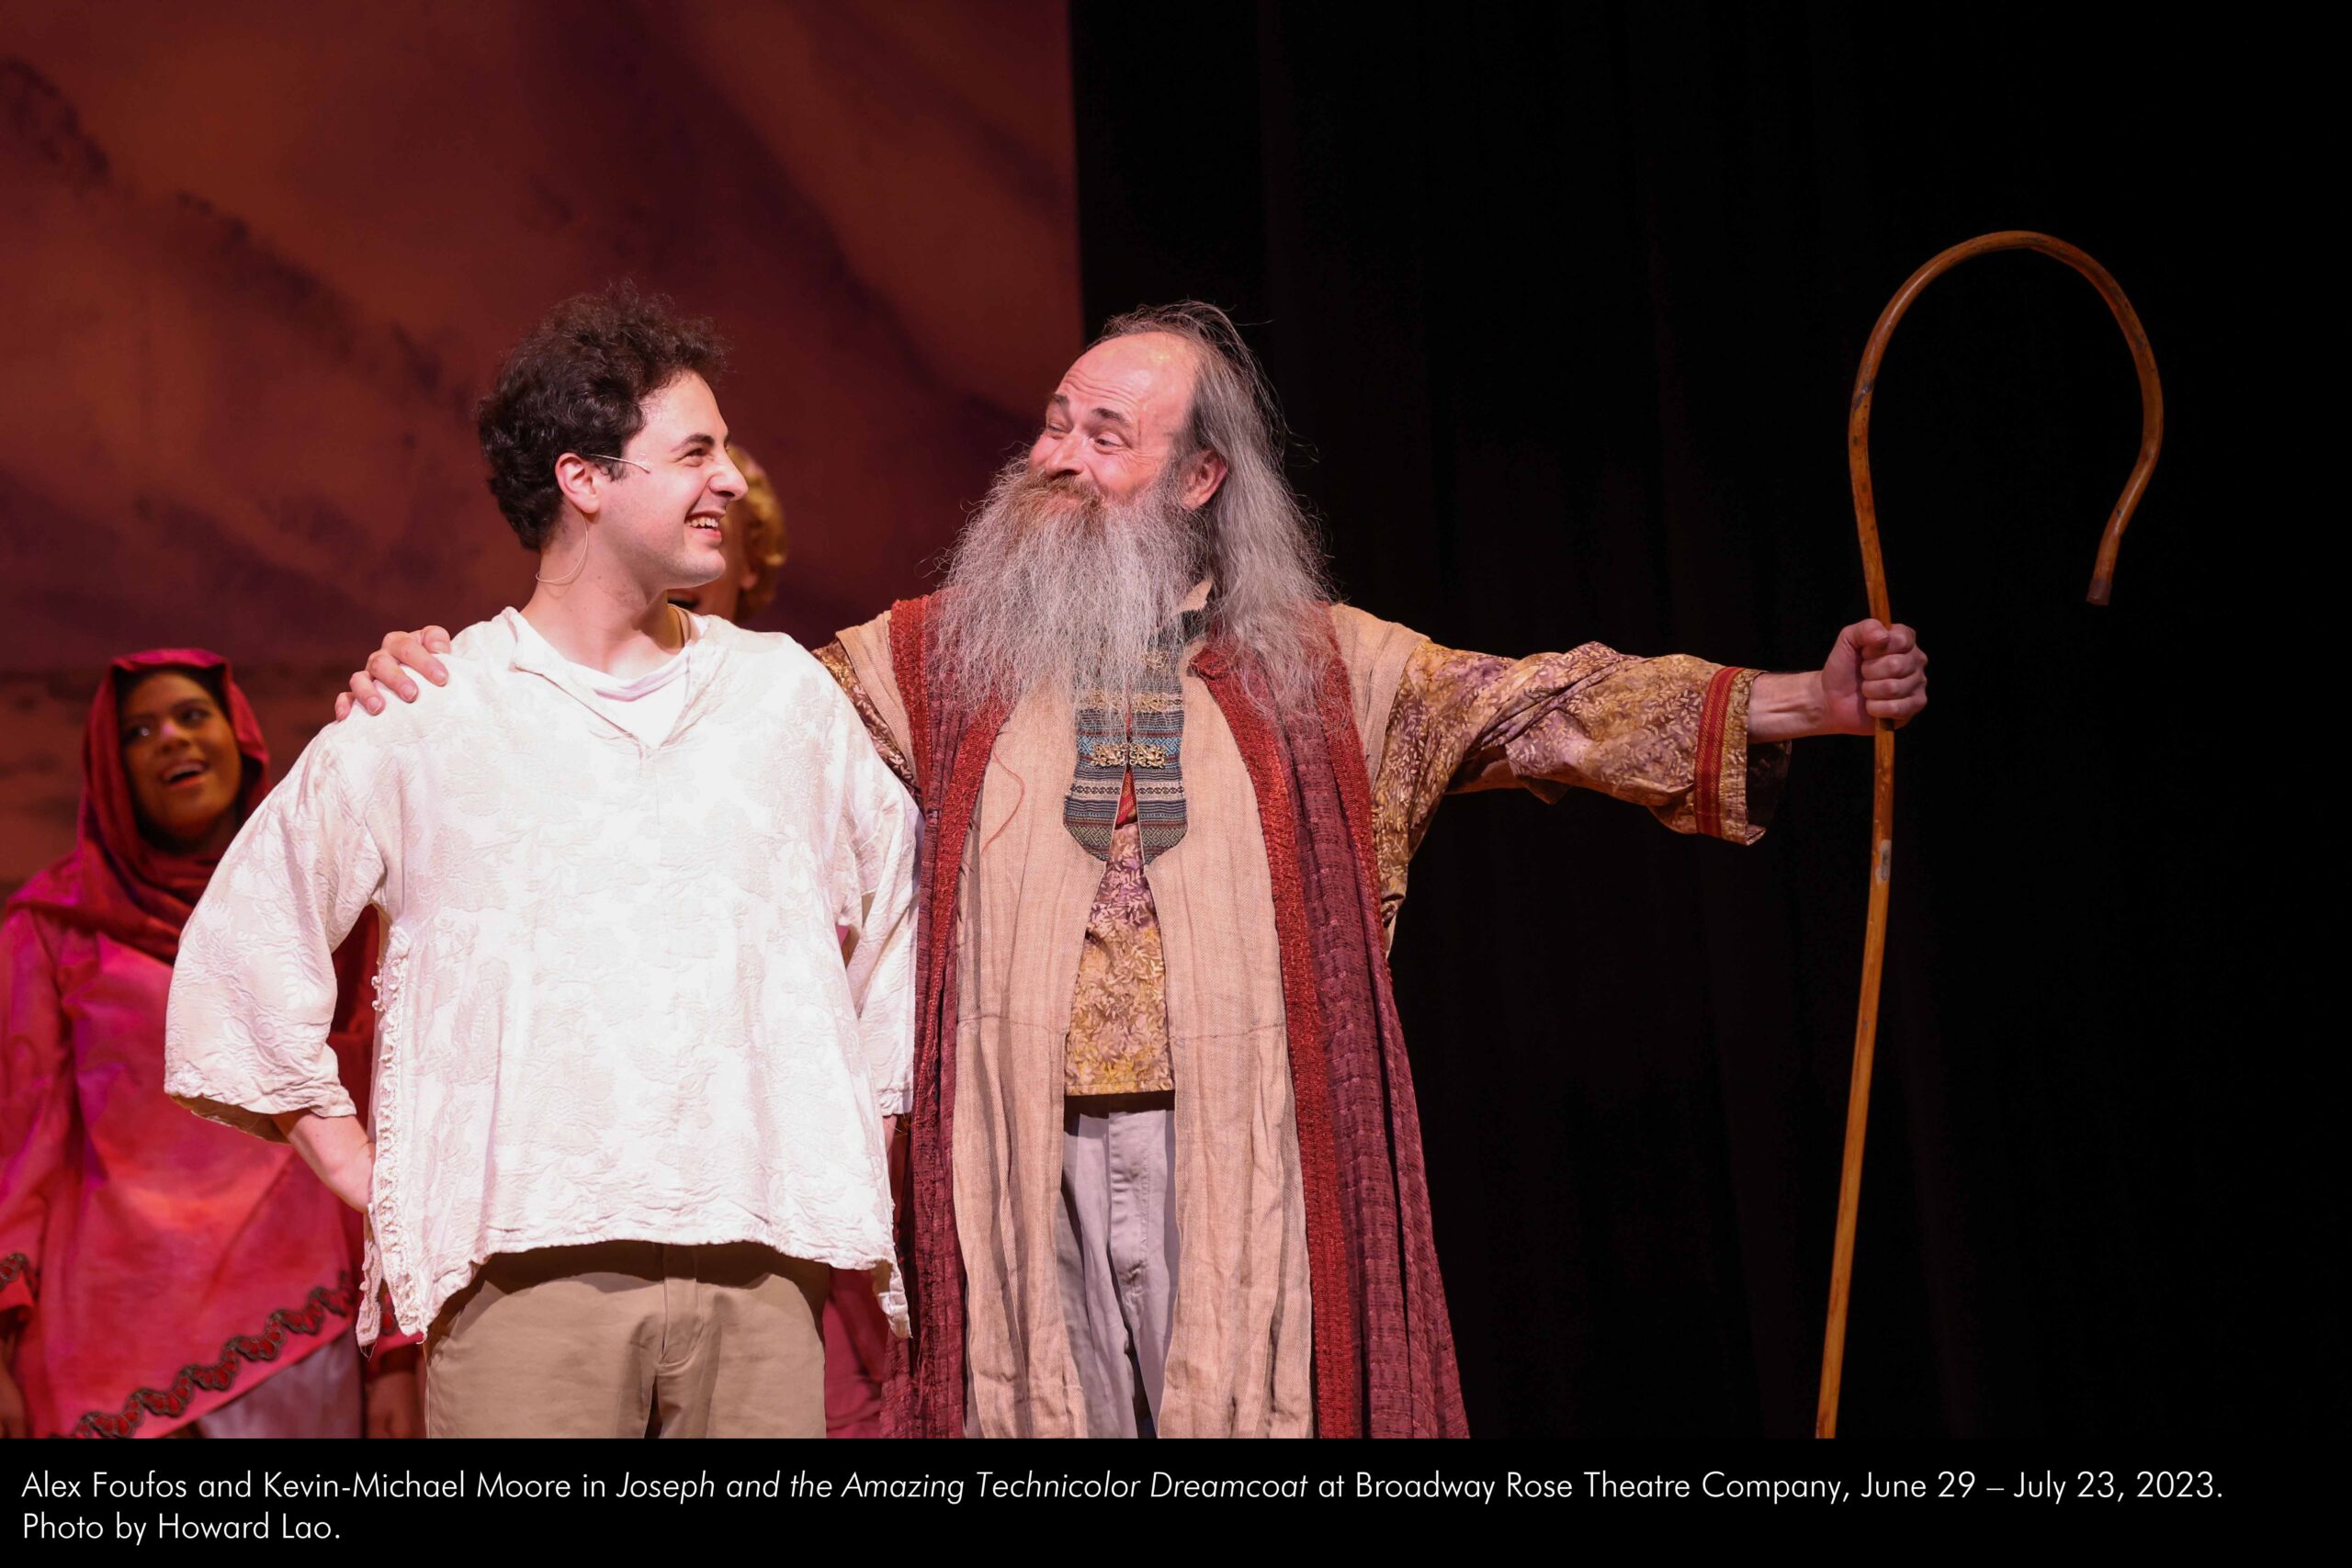 Alex Foufos and Kevin-Michael Moore in Joseph and the Amazing Technicolor Dreamcoat at Broadway Rose Theatre Company, June 29 - July 23, 2023. Photo by Howard Lao.